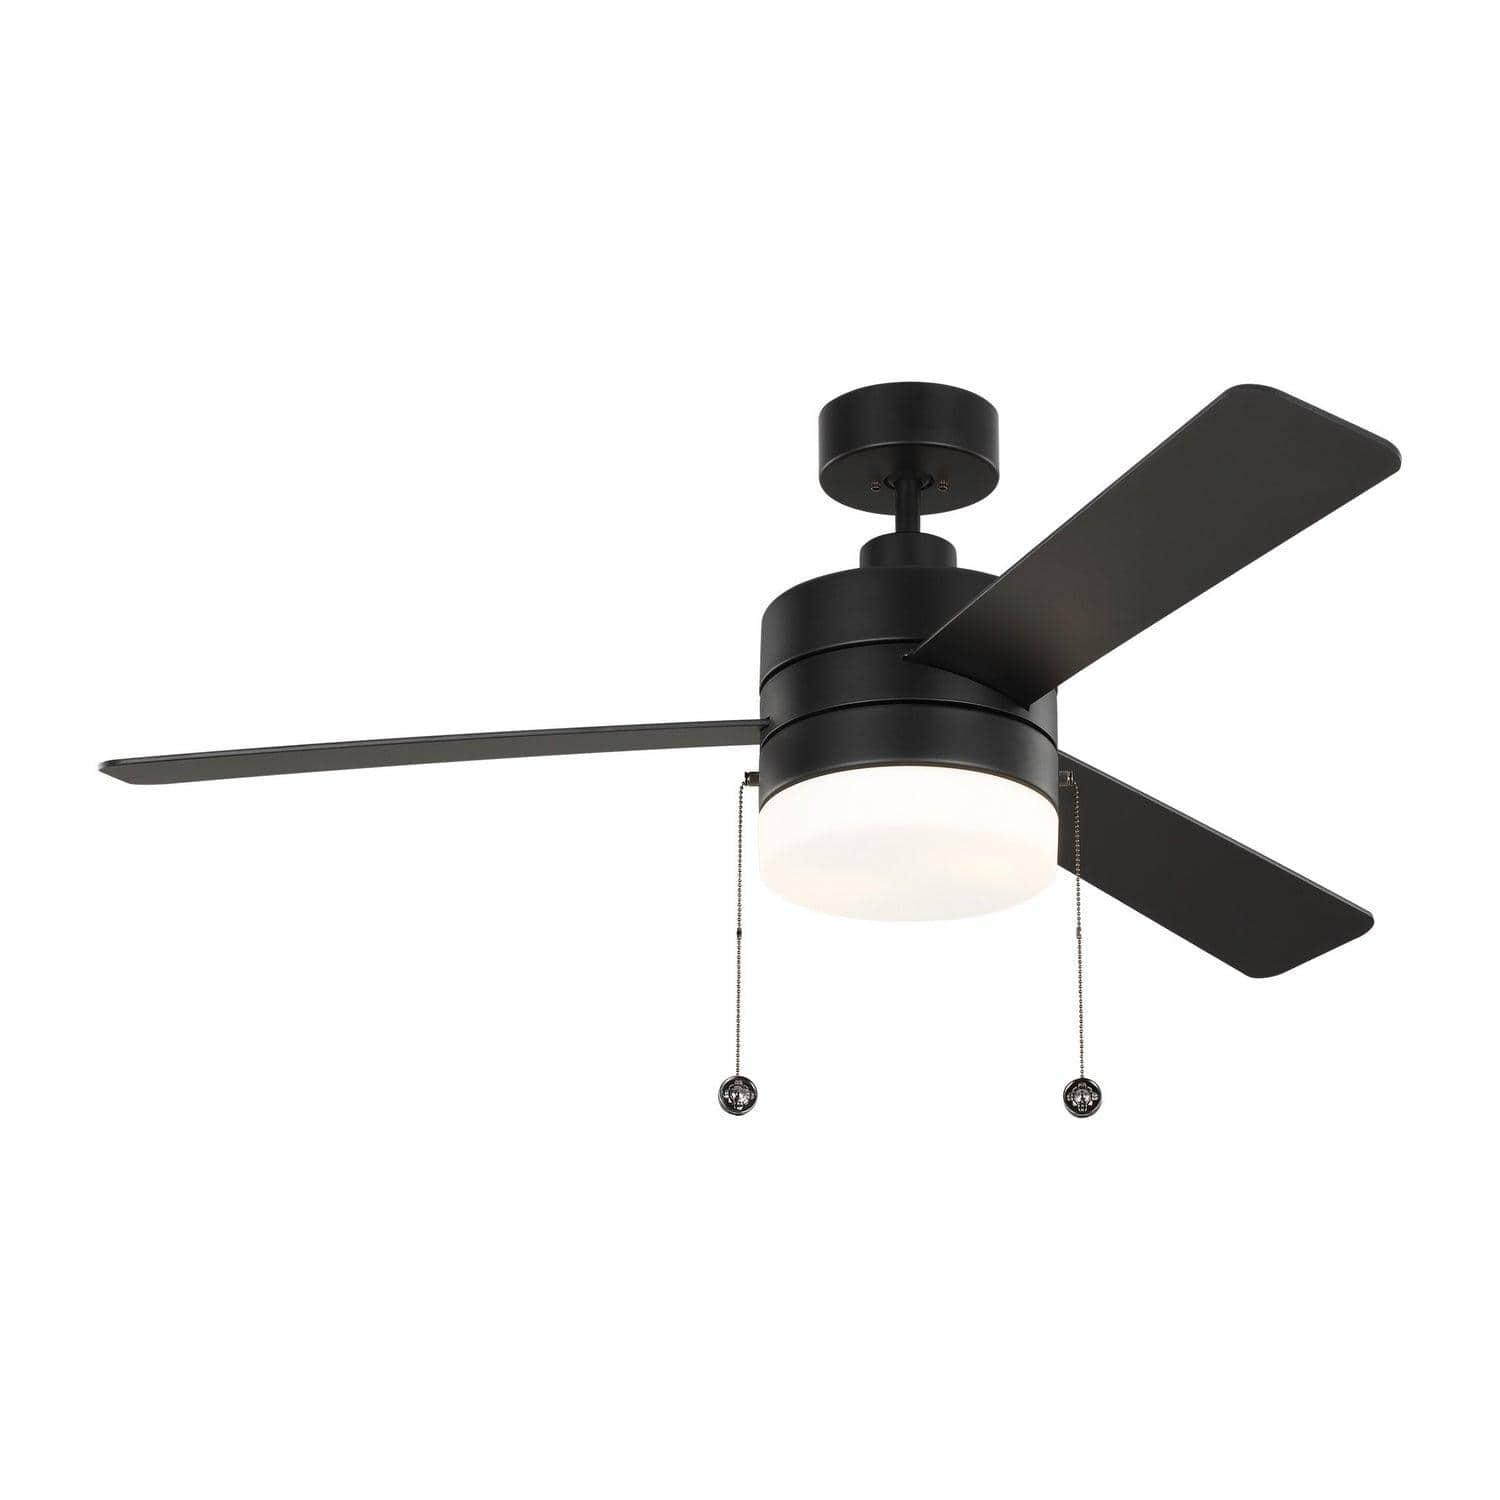 Visual Comfort Fan Collection - Syrus 52" Ceiling Fan - 3SY52MBKD | Montreal Lighting & Hardware